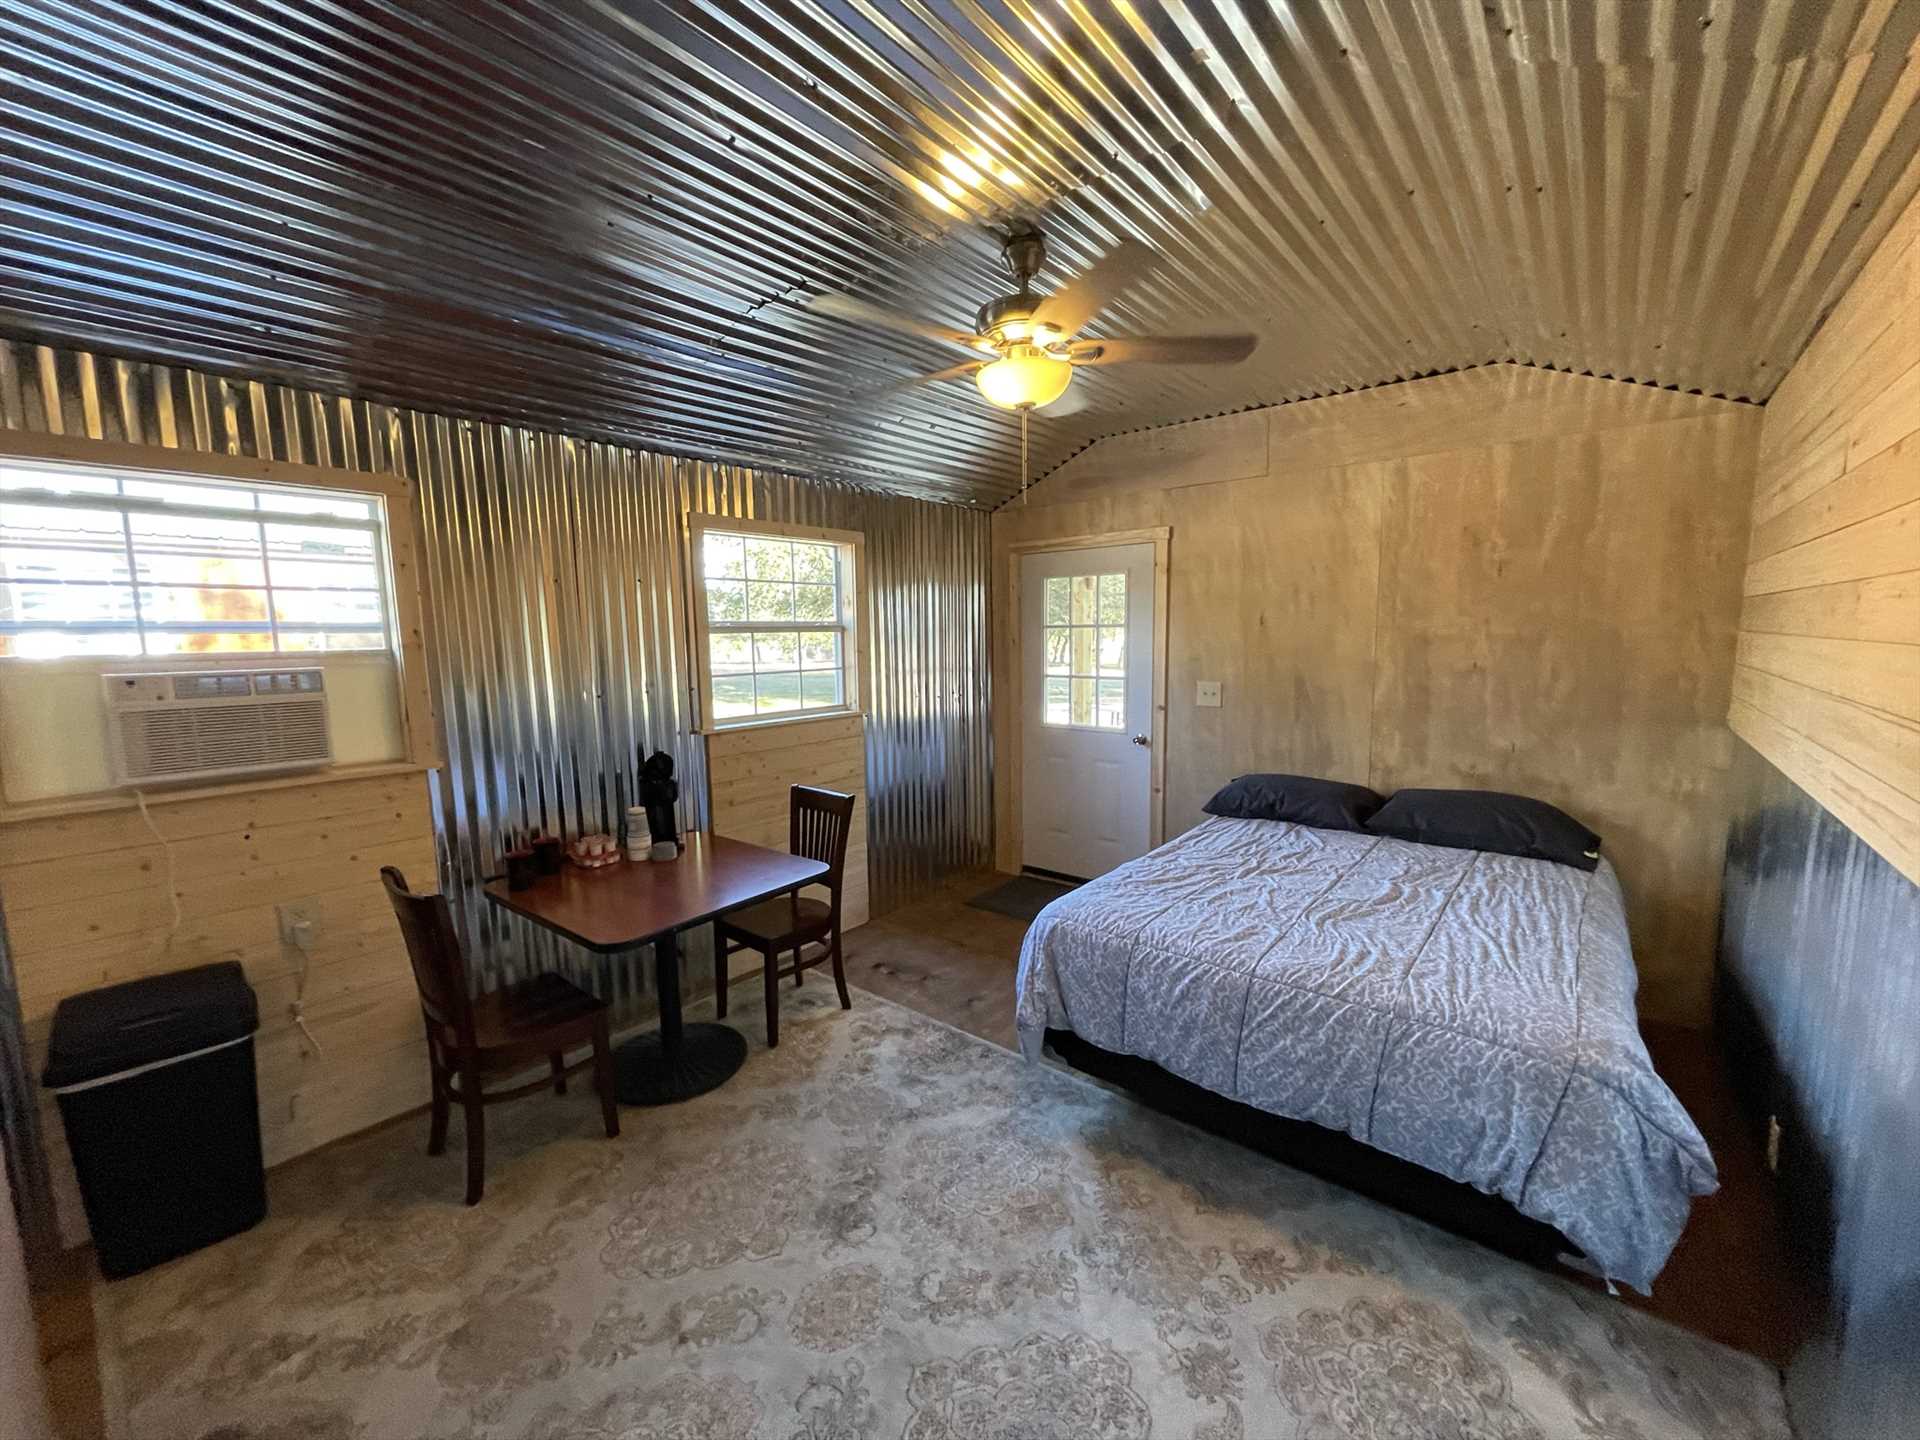                                                 Efficient AC, a ceiling fan, and a queen bed all add up to luxurious comfort! A roll-away bed is available on request for a third person, too.